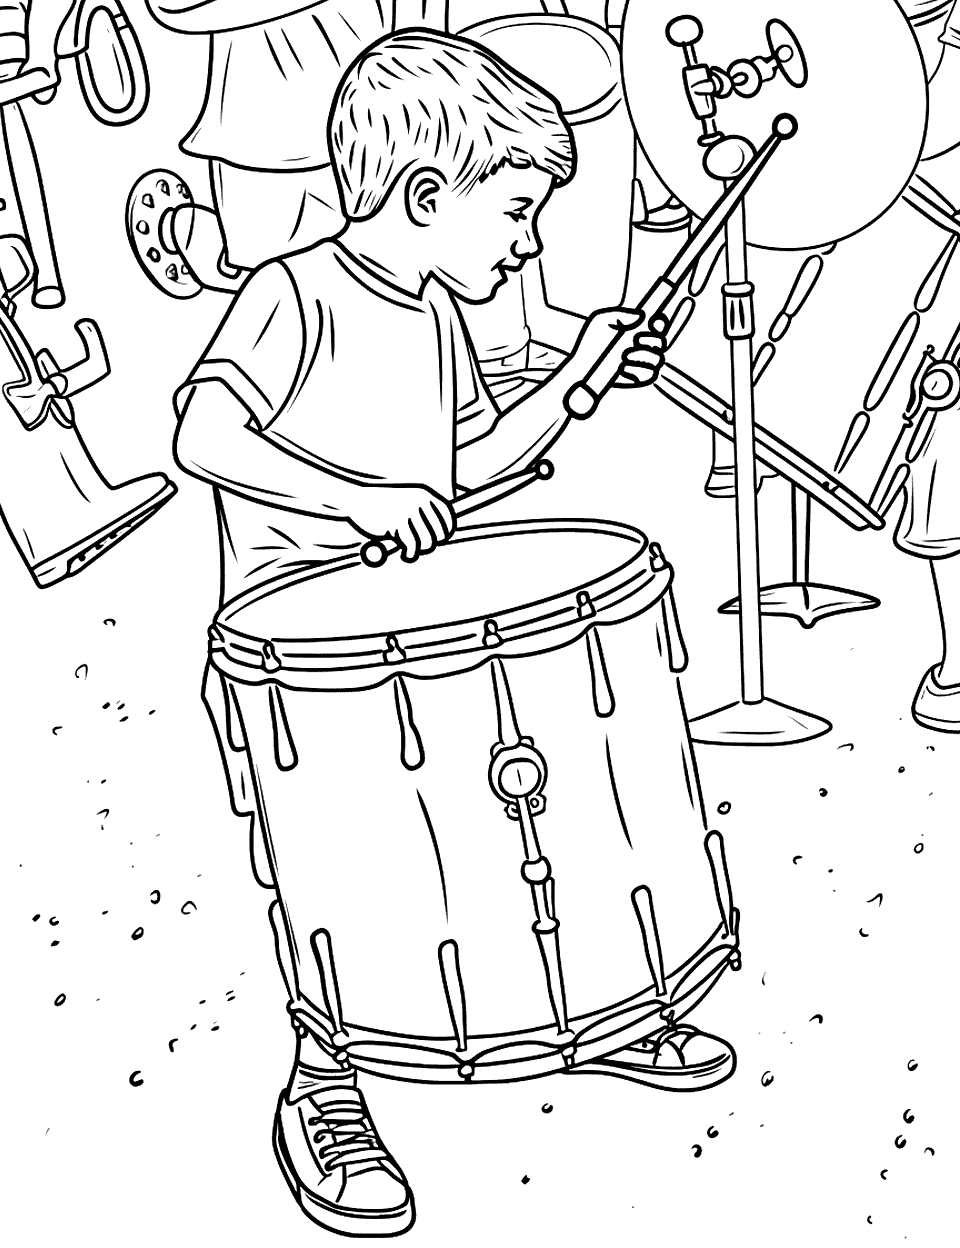 Drummer at the Parade Music Coloring Page - A young boy playing a snare drum in a festive street parade.